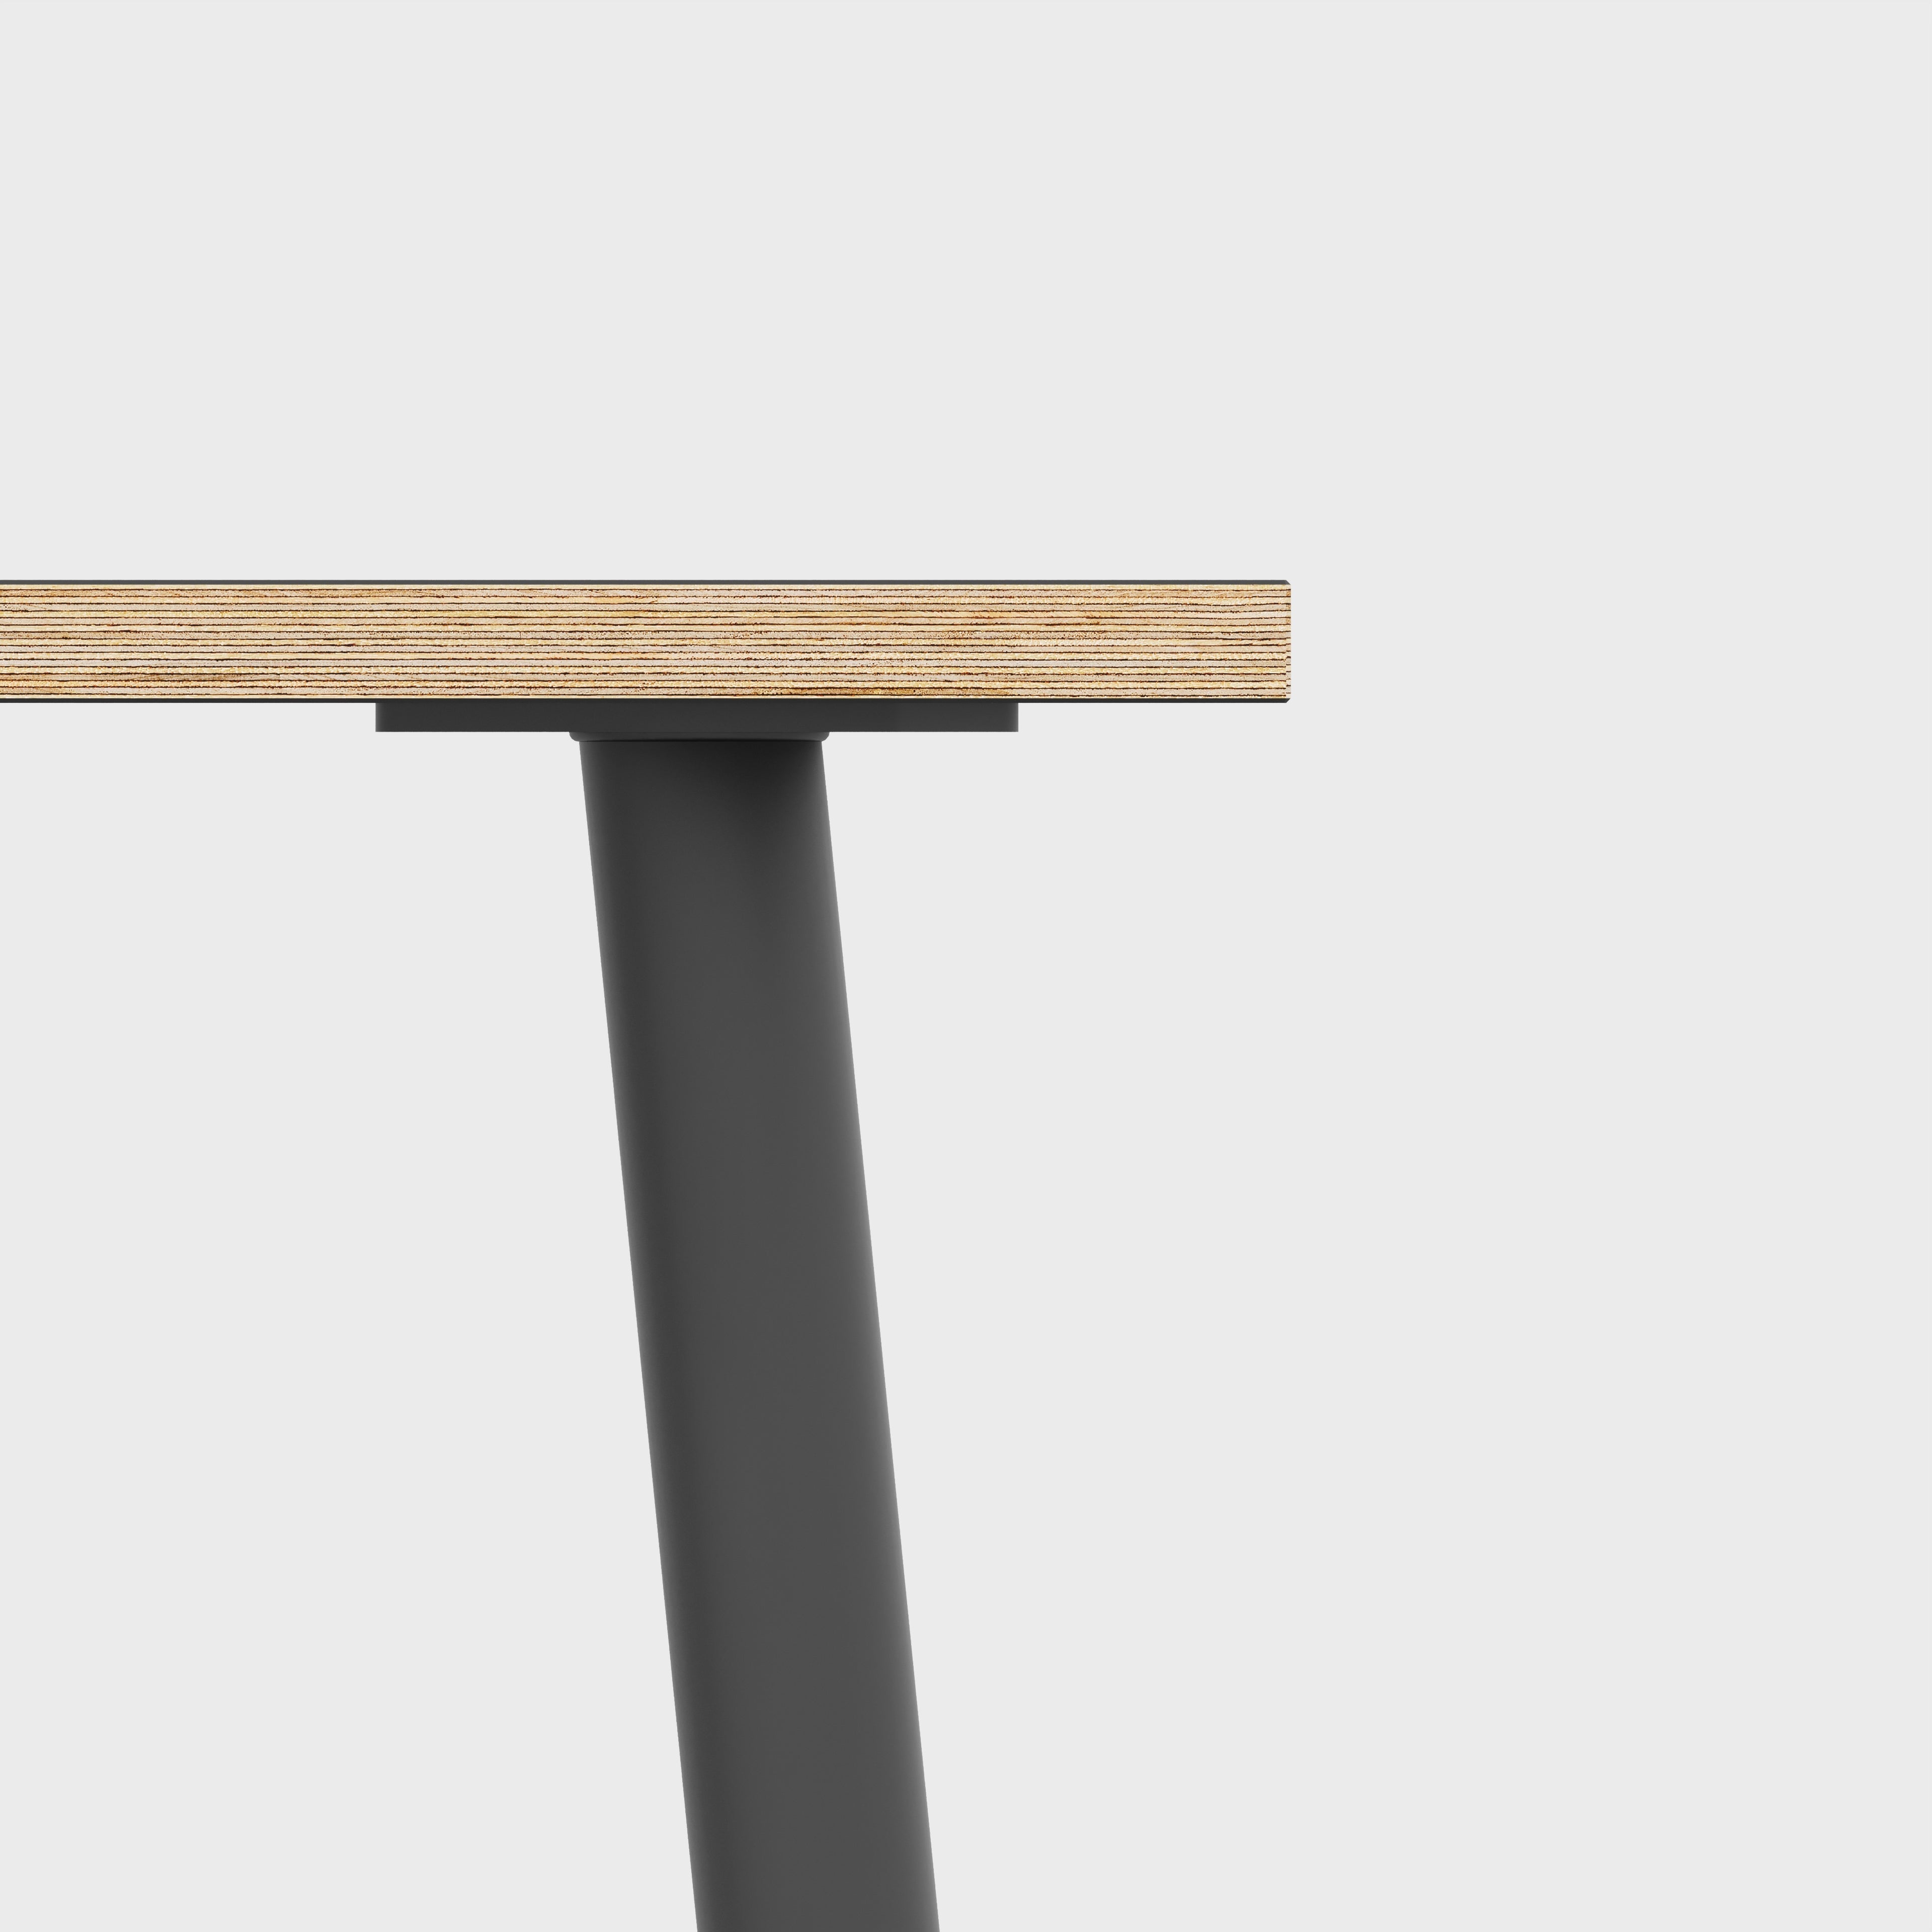 Table with Black Round Single Pin Legs - Plywood Oak - 1600(w) x 800(d) x 735(h)